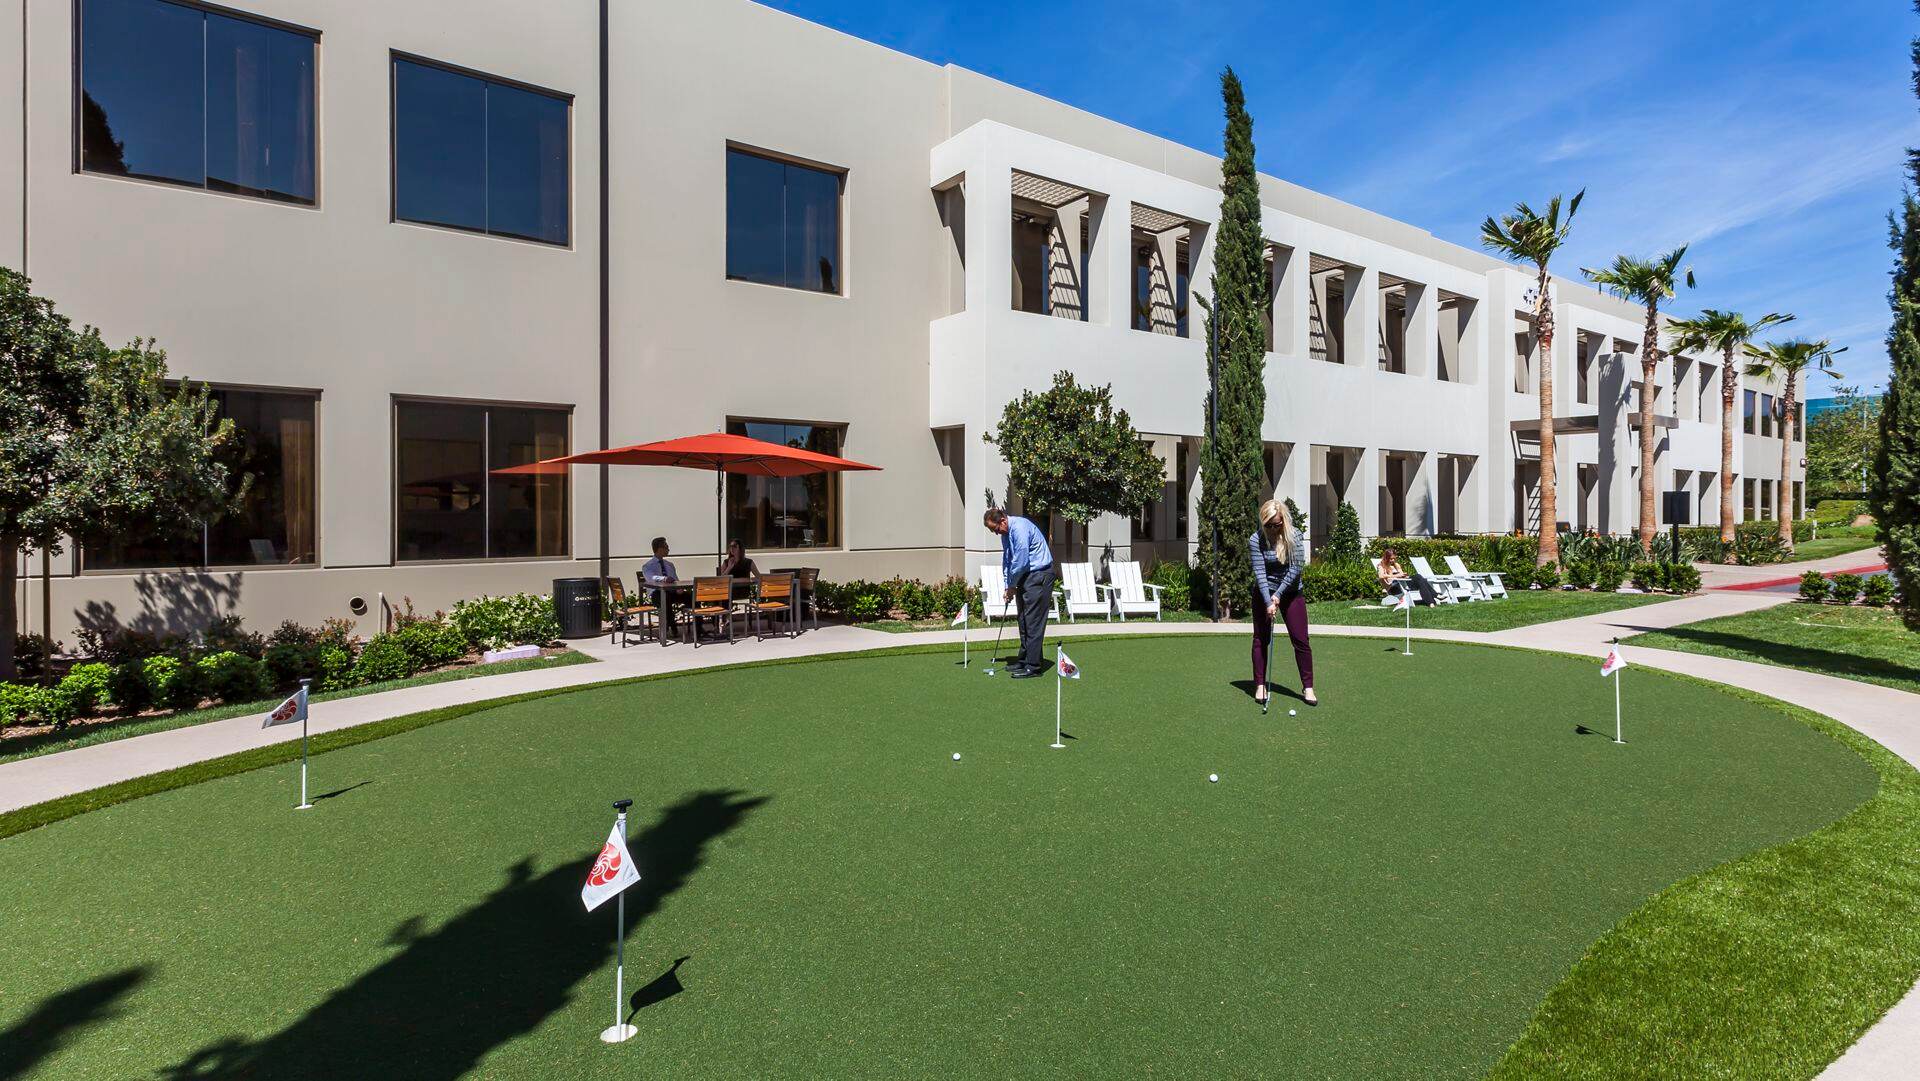 Putting Green - Eastgate - 4755-4875 Eastgate Mall / 9515-9890 Towne Centre Drive,  San Diego, CA 92121